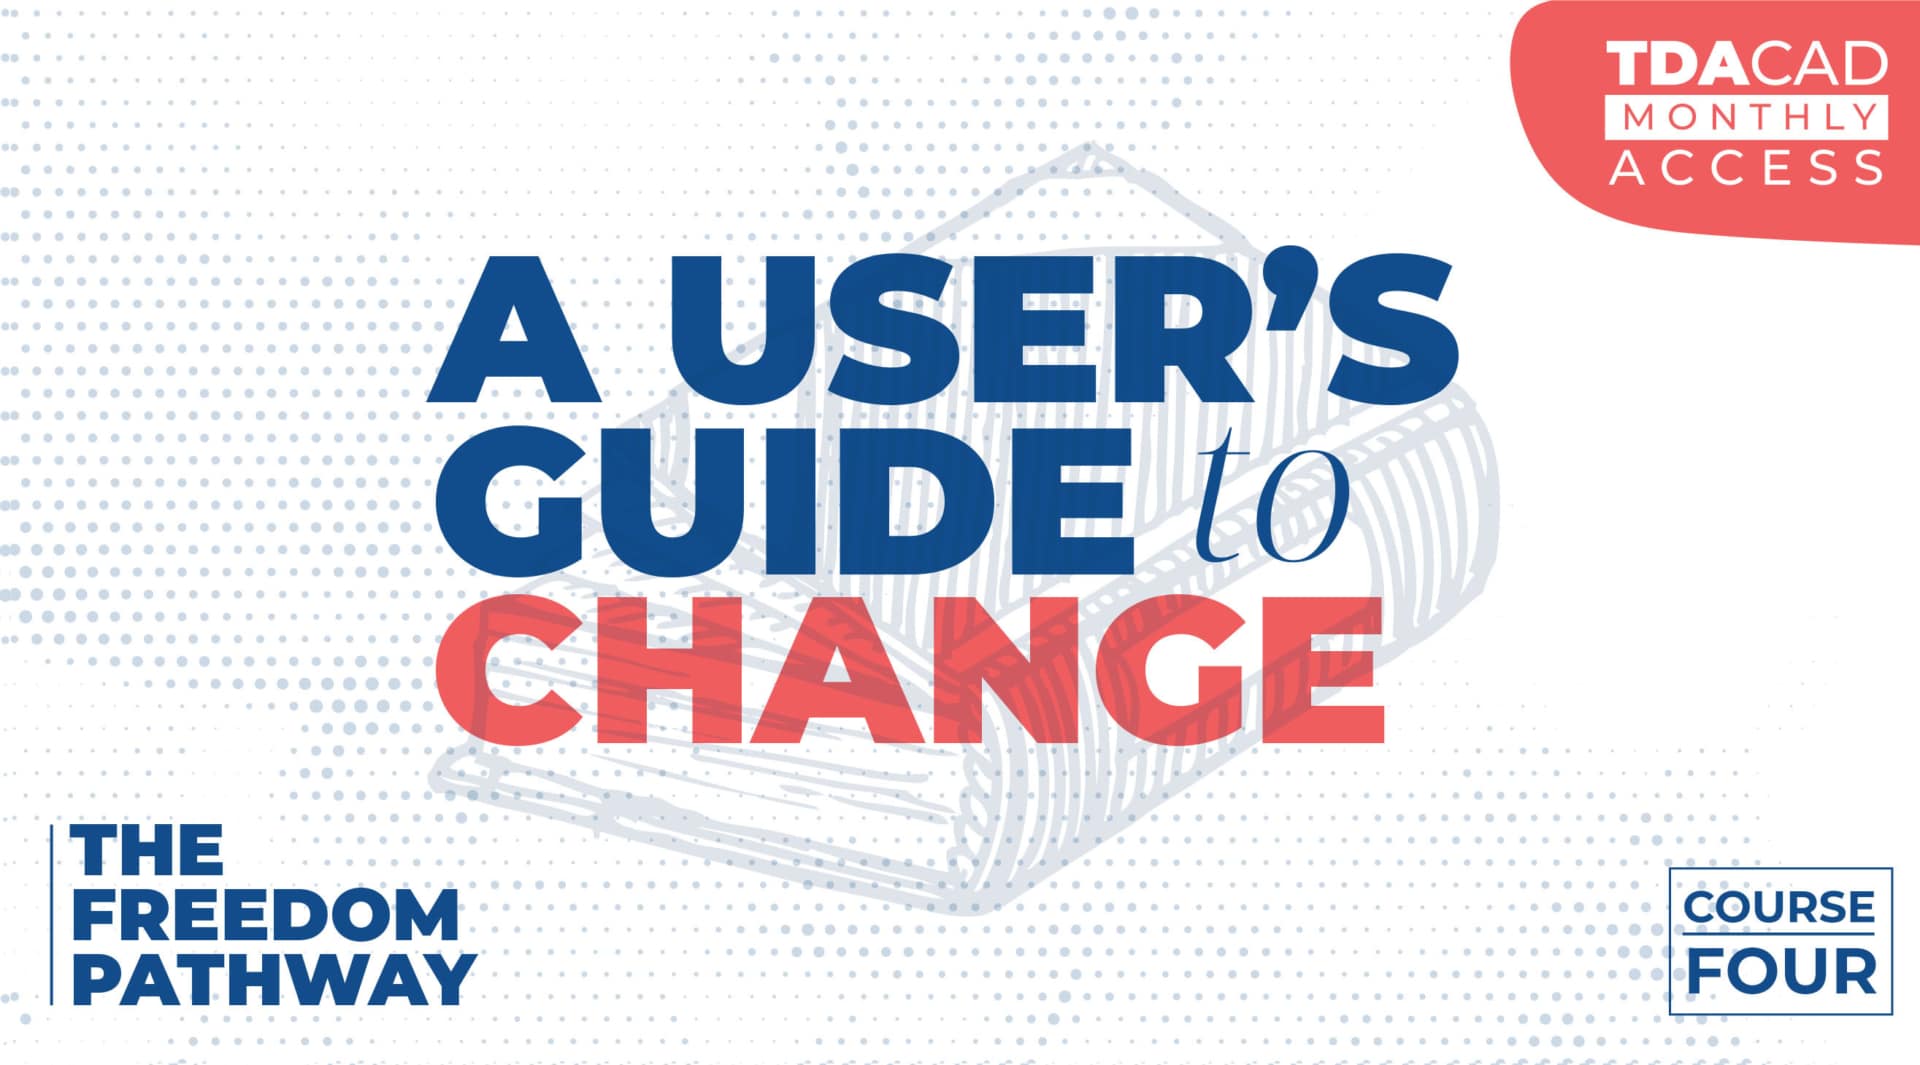 A Users Guide to Change